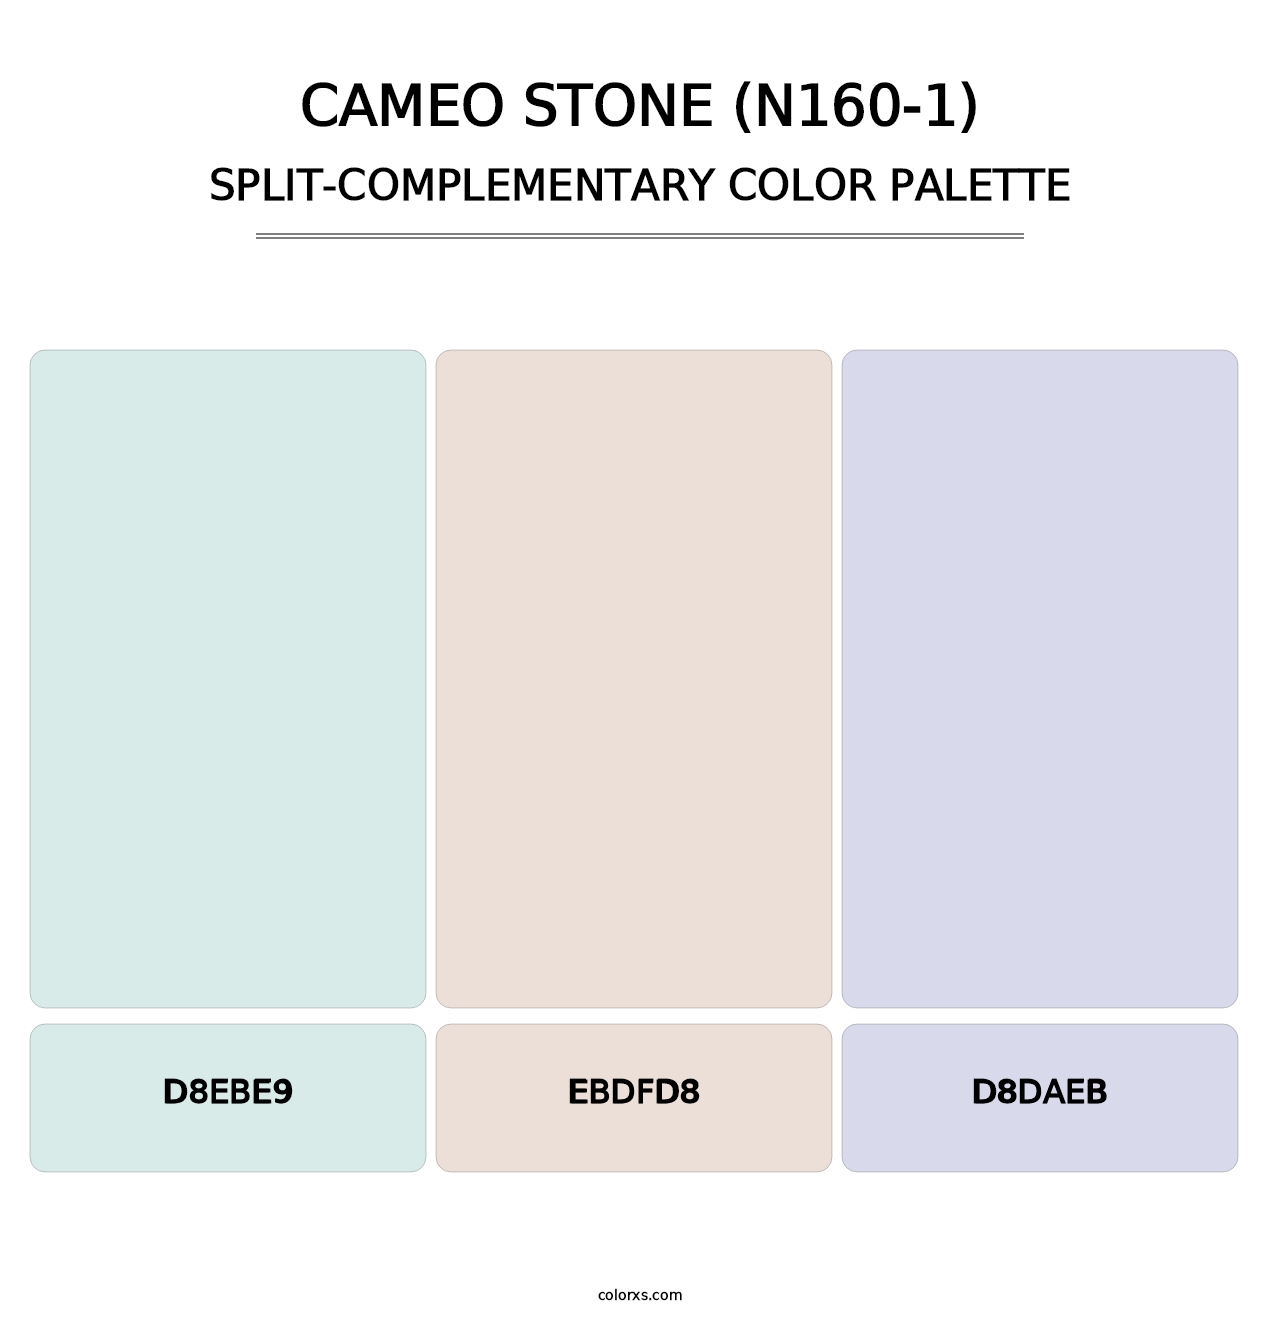 Cameo Stone (N160-1) - Split-Complementary Color Palette